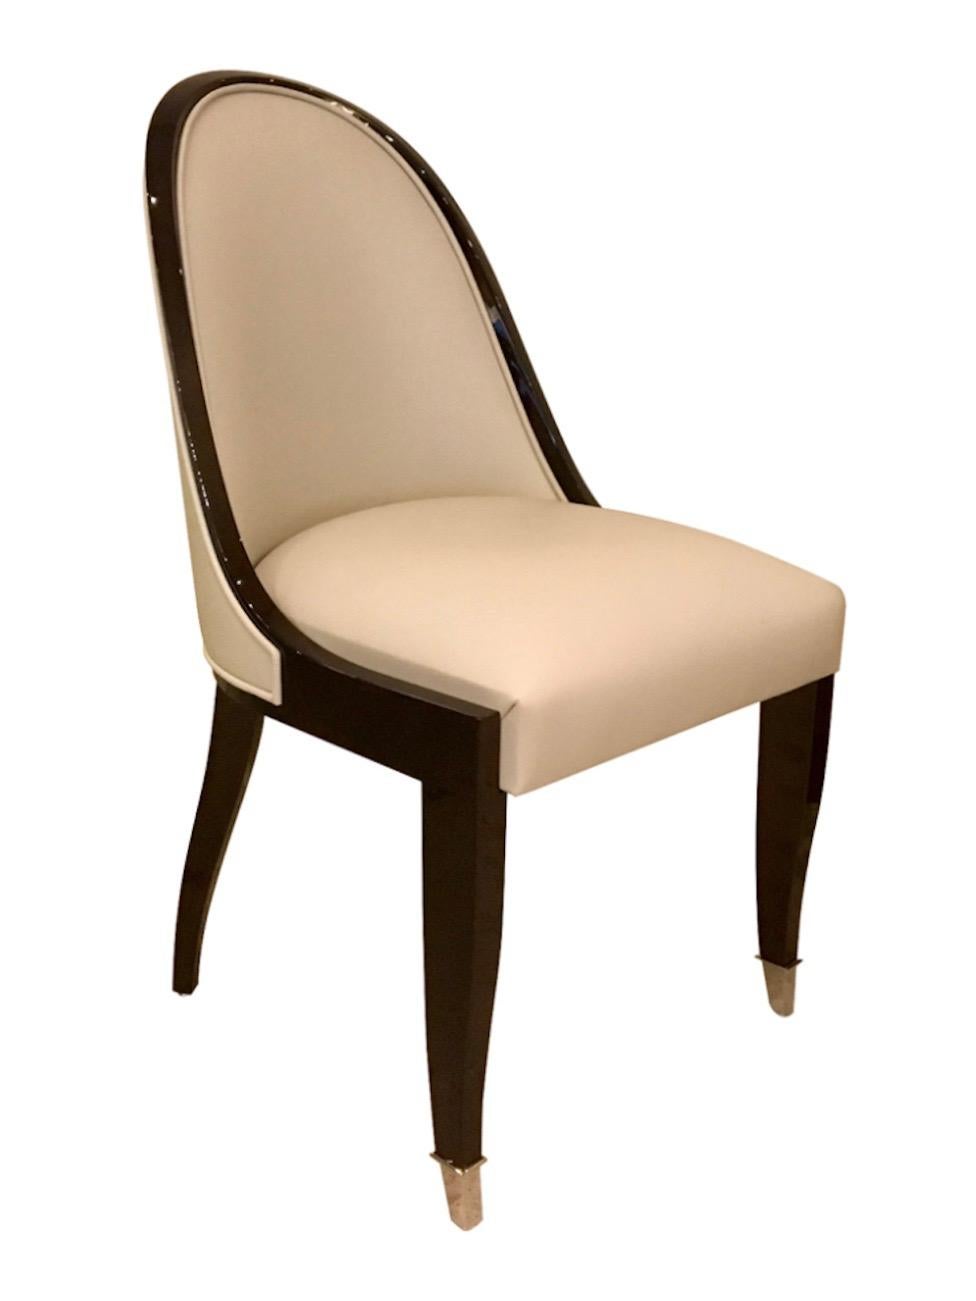 Elegant Art Deco chair with beautifully narrow curved backrest. 
This is the most famous Art Deco chair shape. 
Very elaborate in production, offers excellent seating comfort. 

High quality! Handmade in Germany. 

Lacquered Wood. 
Two metal